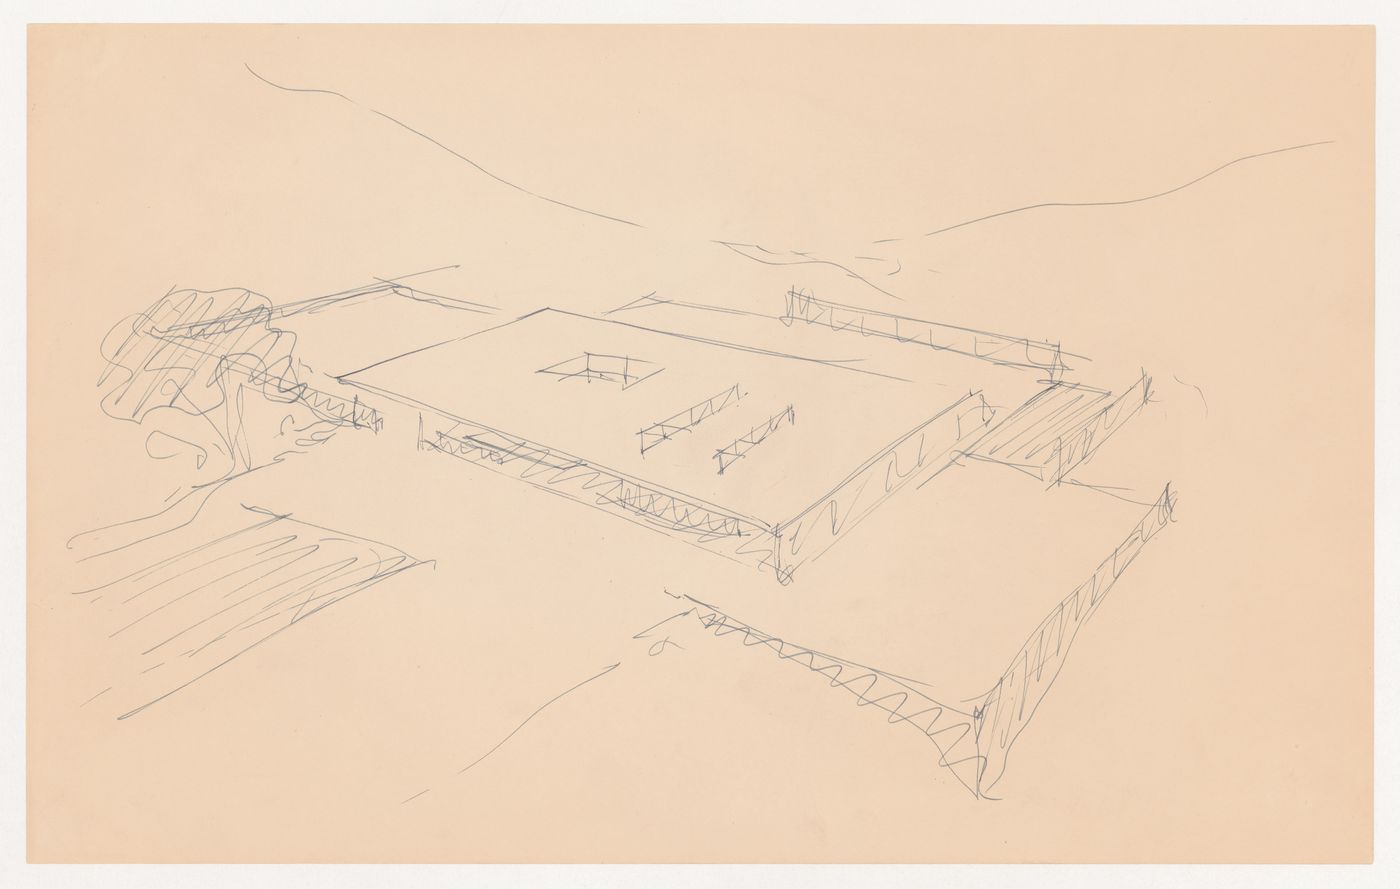 Bird's-eye perspective sketch for the building and site for Museum for a Small City with surrounding landscape